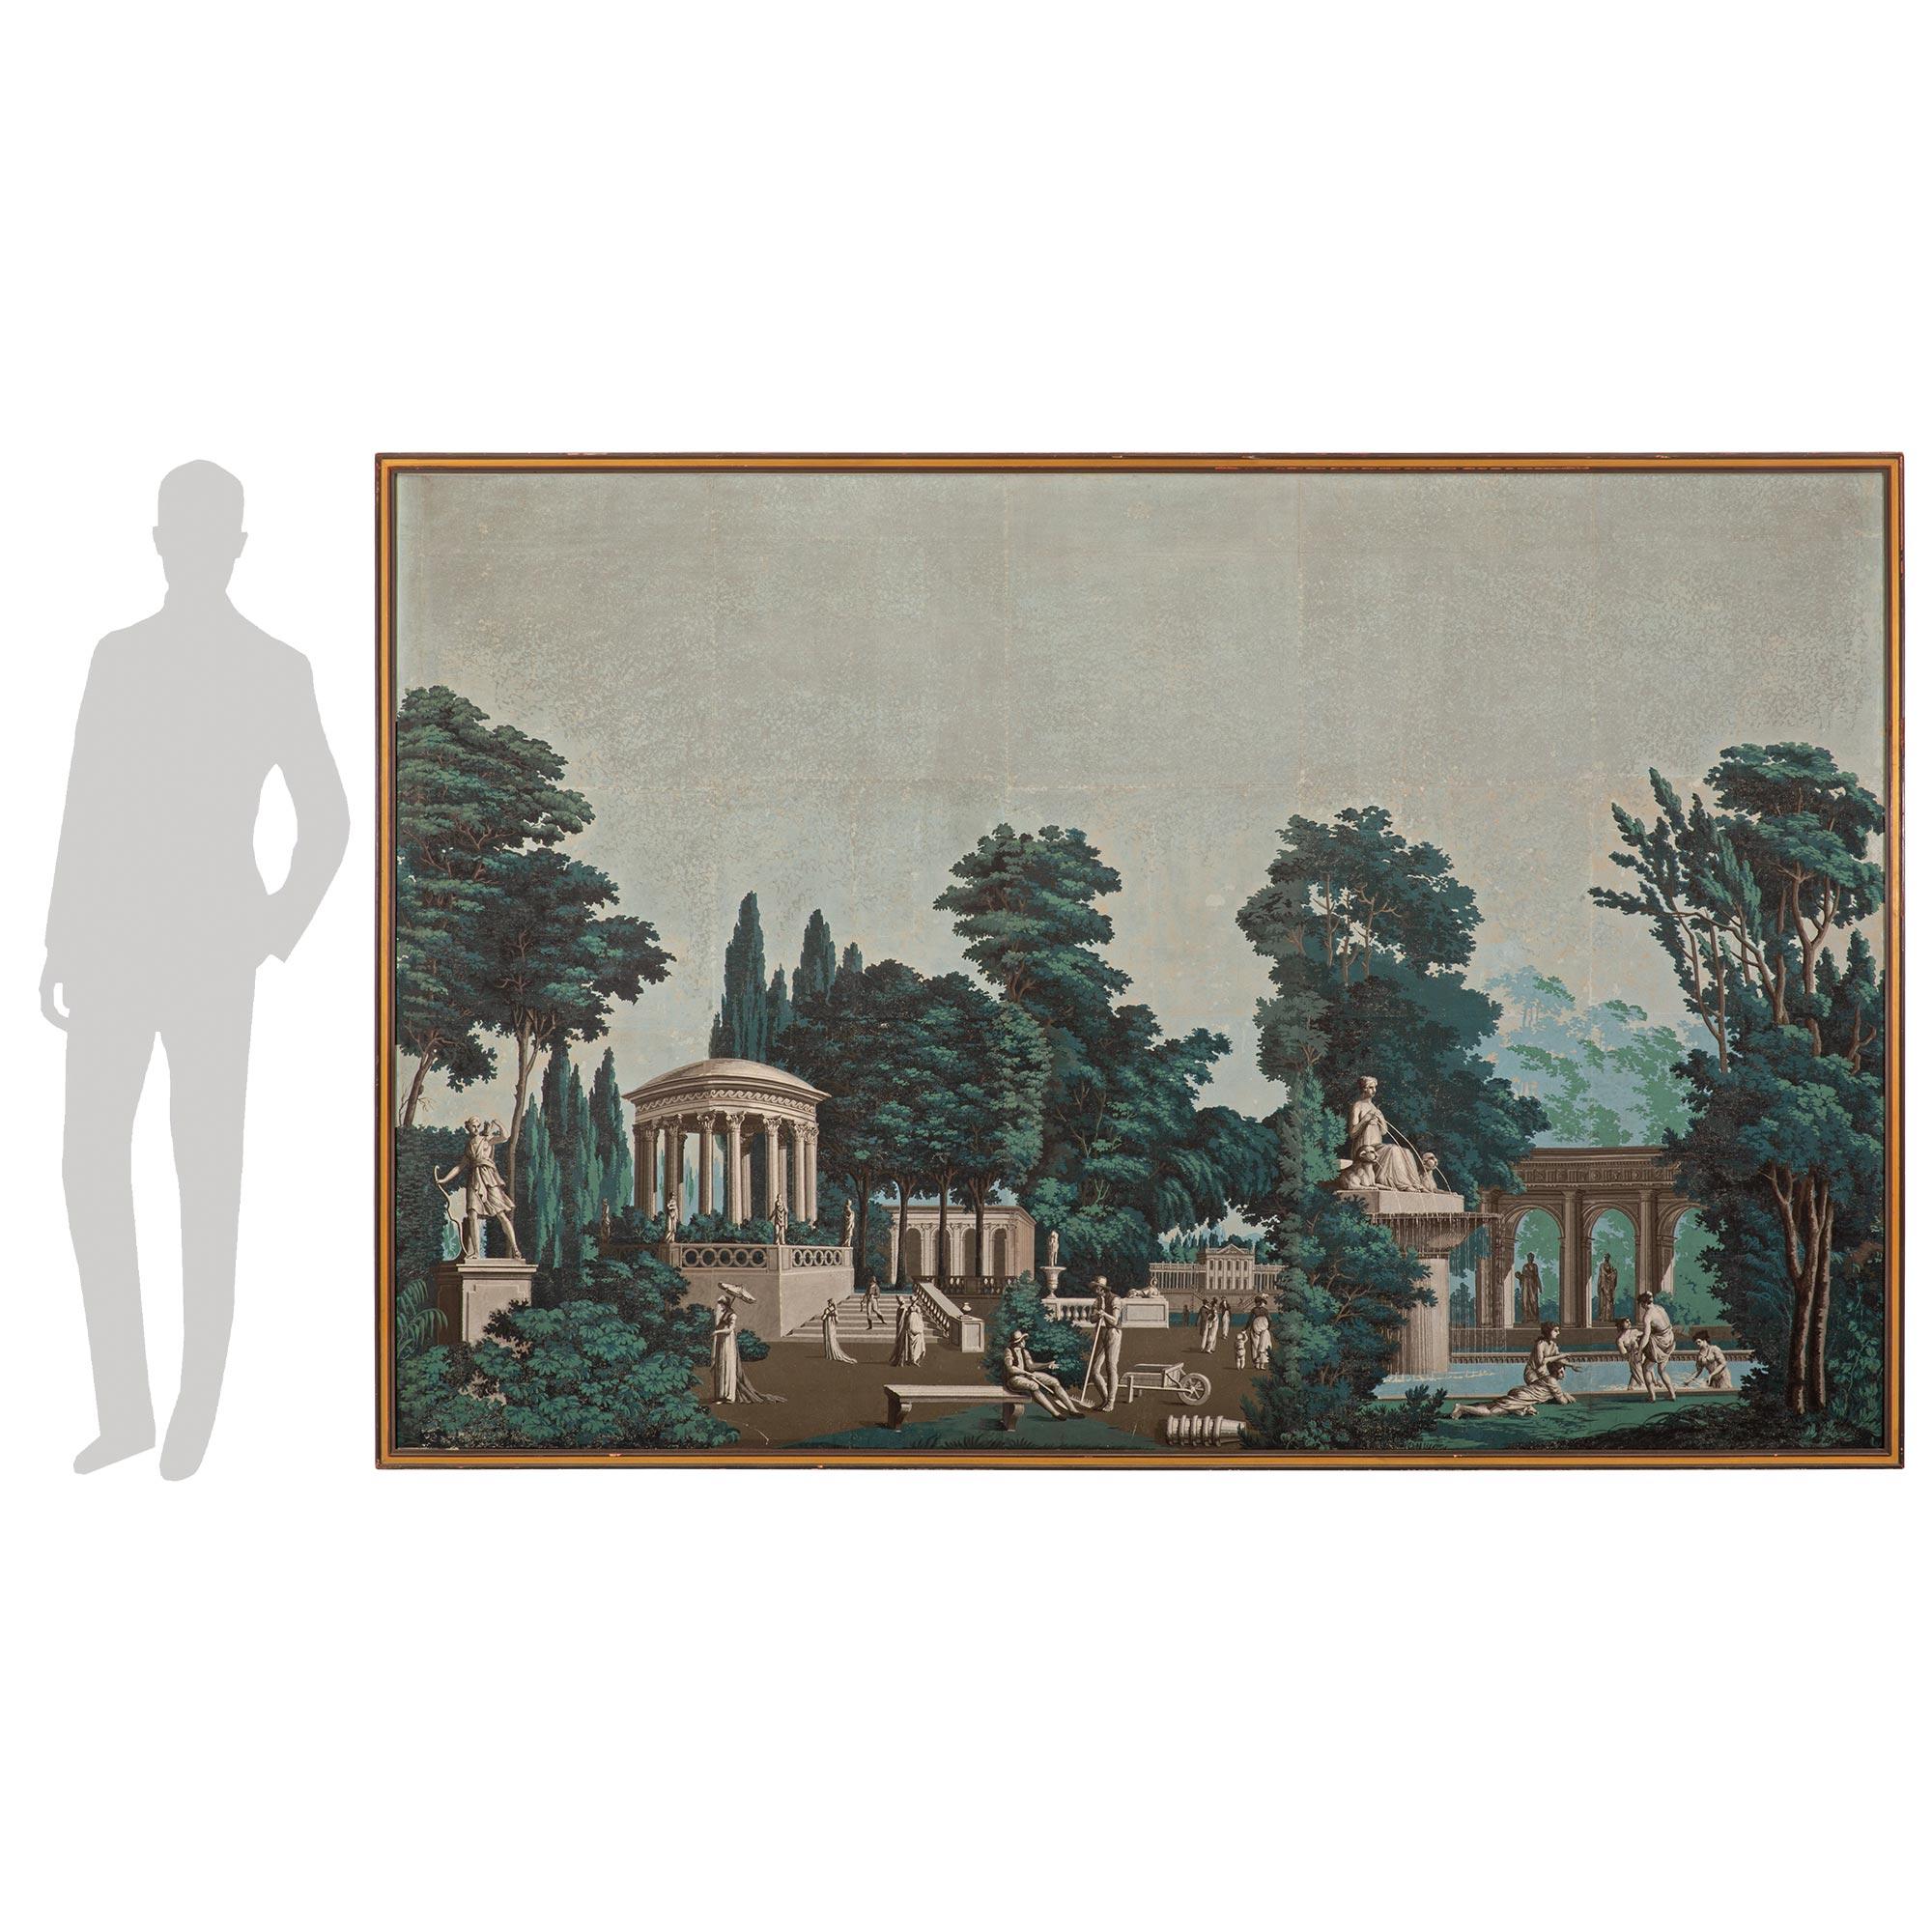 A most decorative and very large scale French 19th century framed wallpaper wall decor. The wallpaper is set within a straight patinated frame with an elegant mottled design. The wallpaper depicts a lovely scene in a French park on a beautiful clear